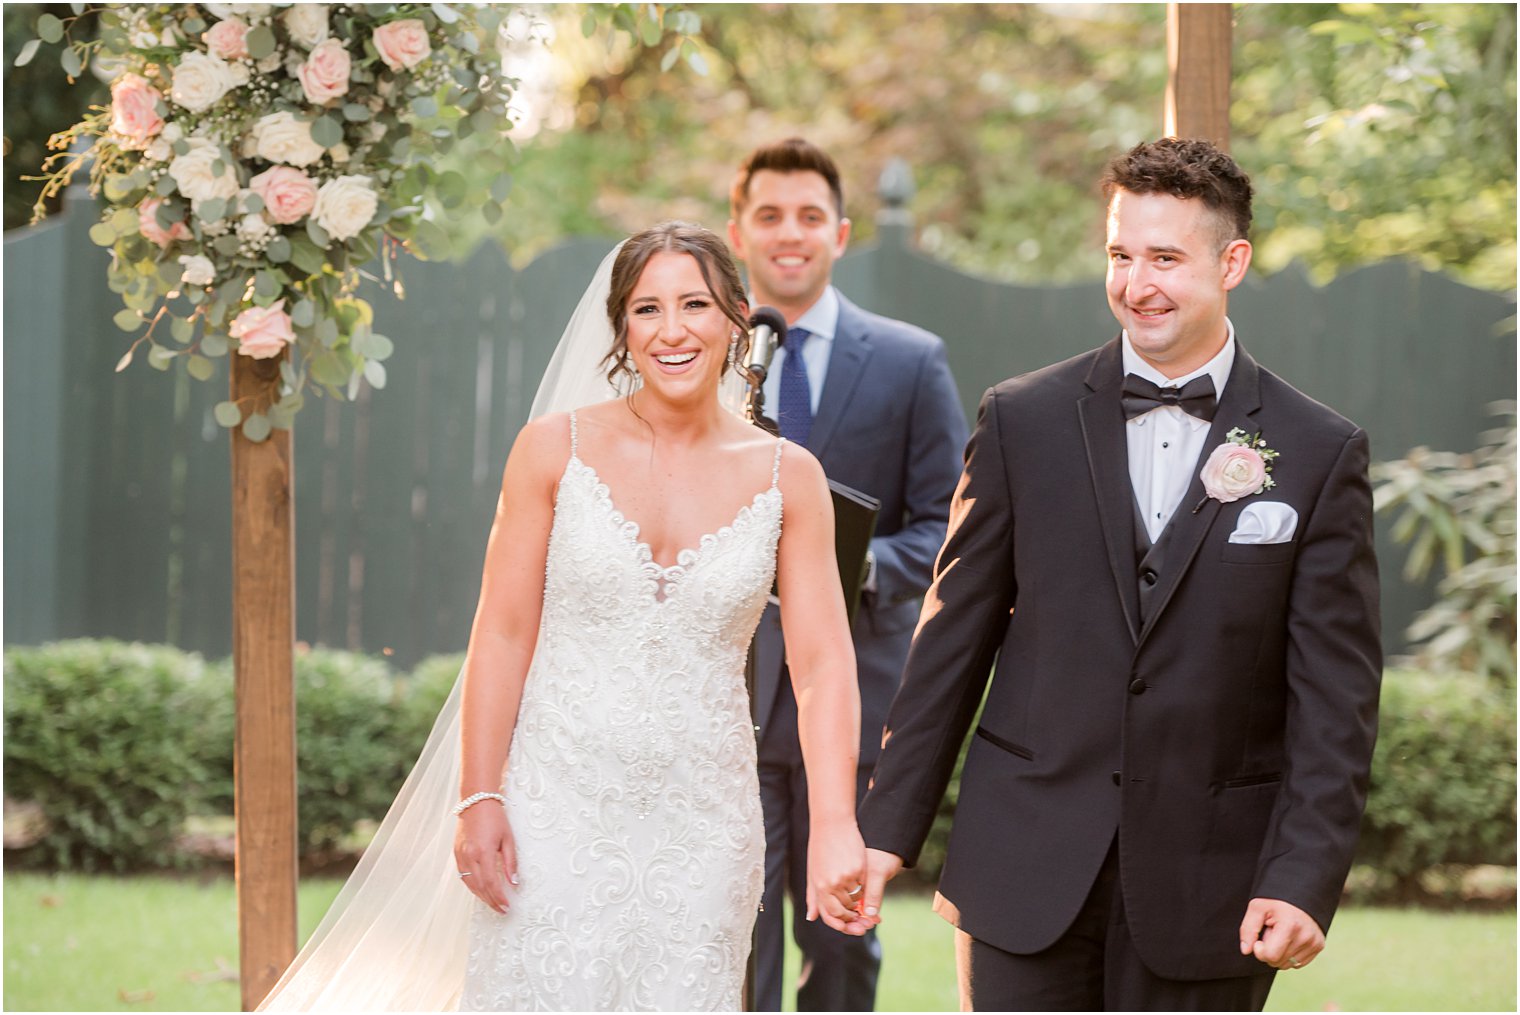 bride and groom smile at guests after wedding ceremony in garden at The Inn at Fernbrook Farms